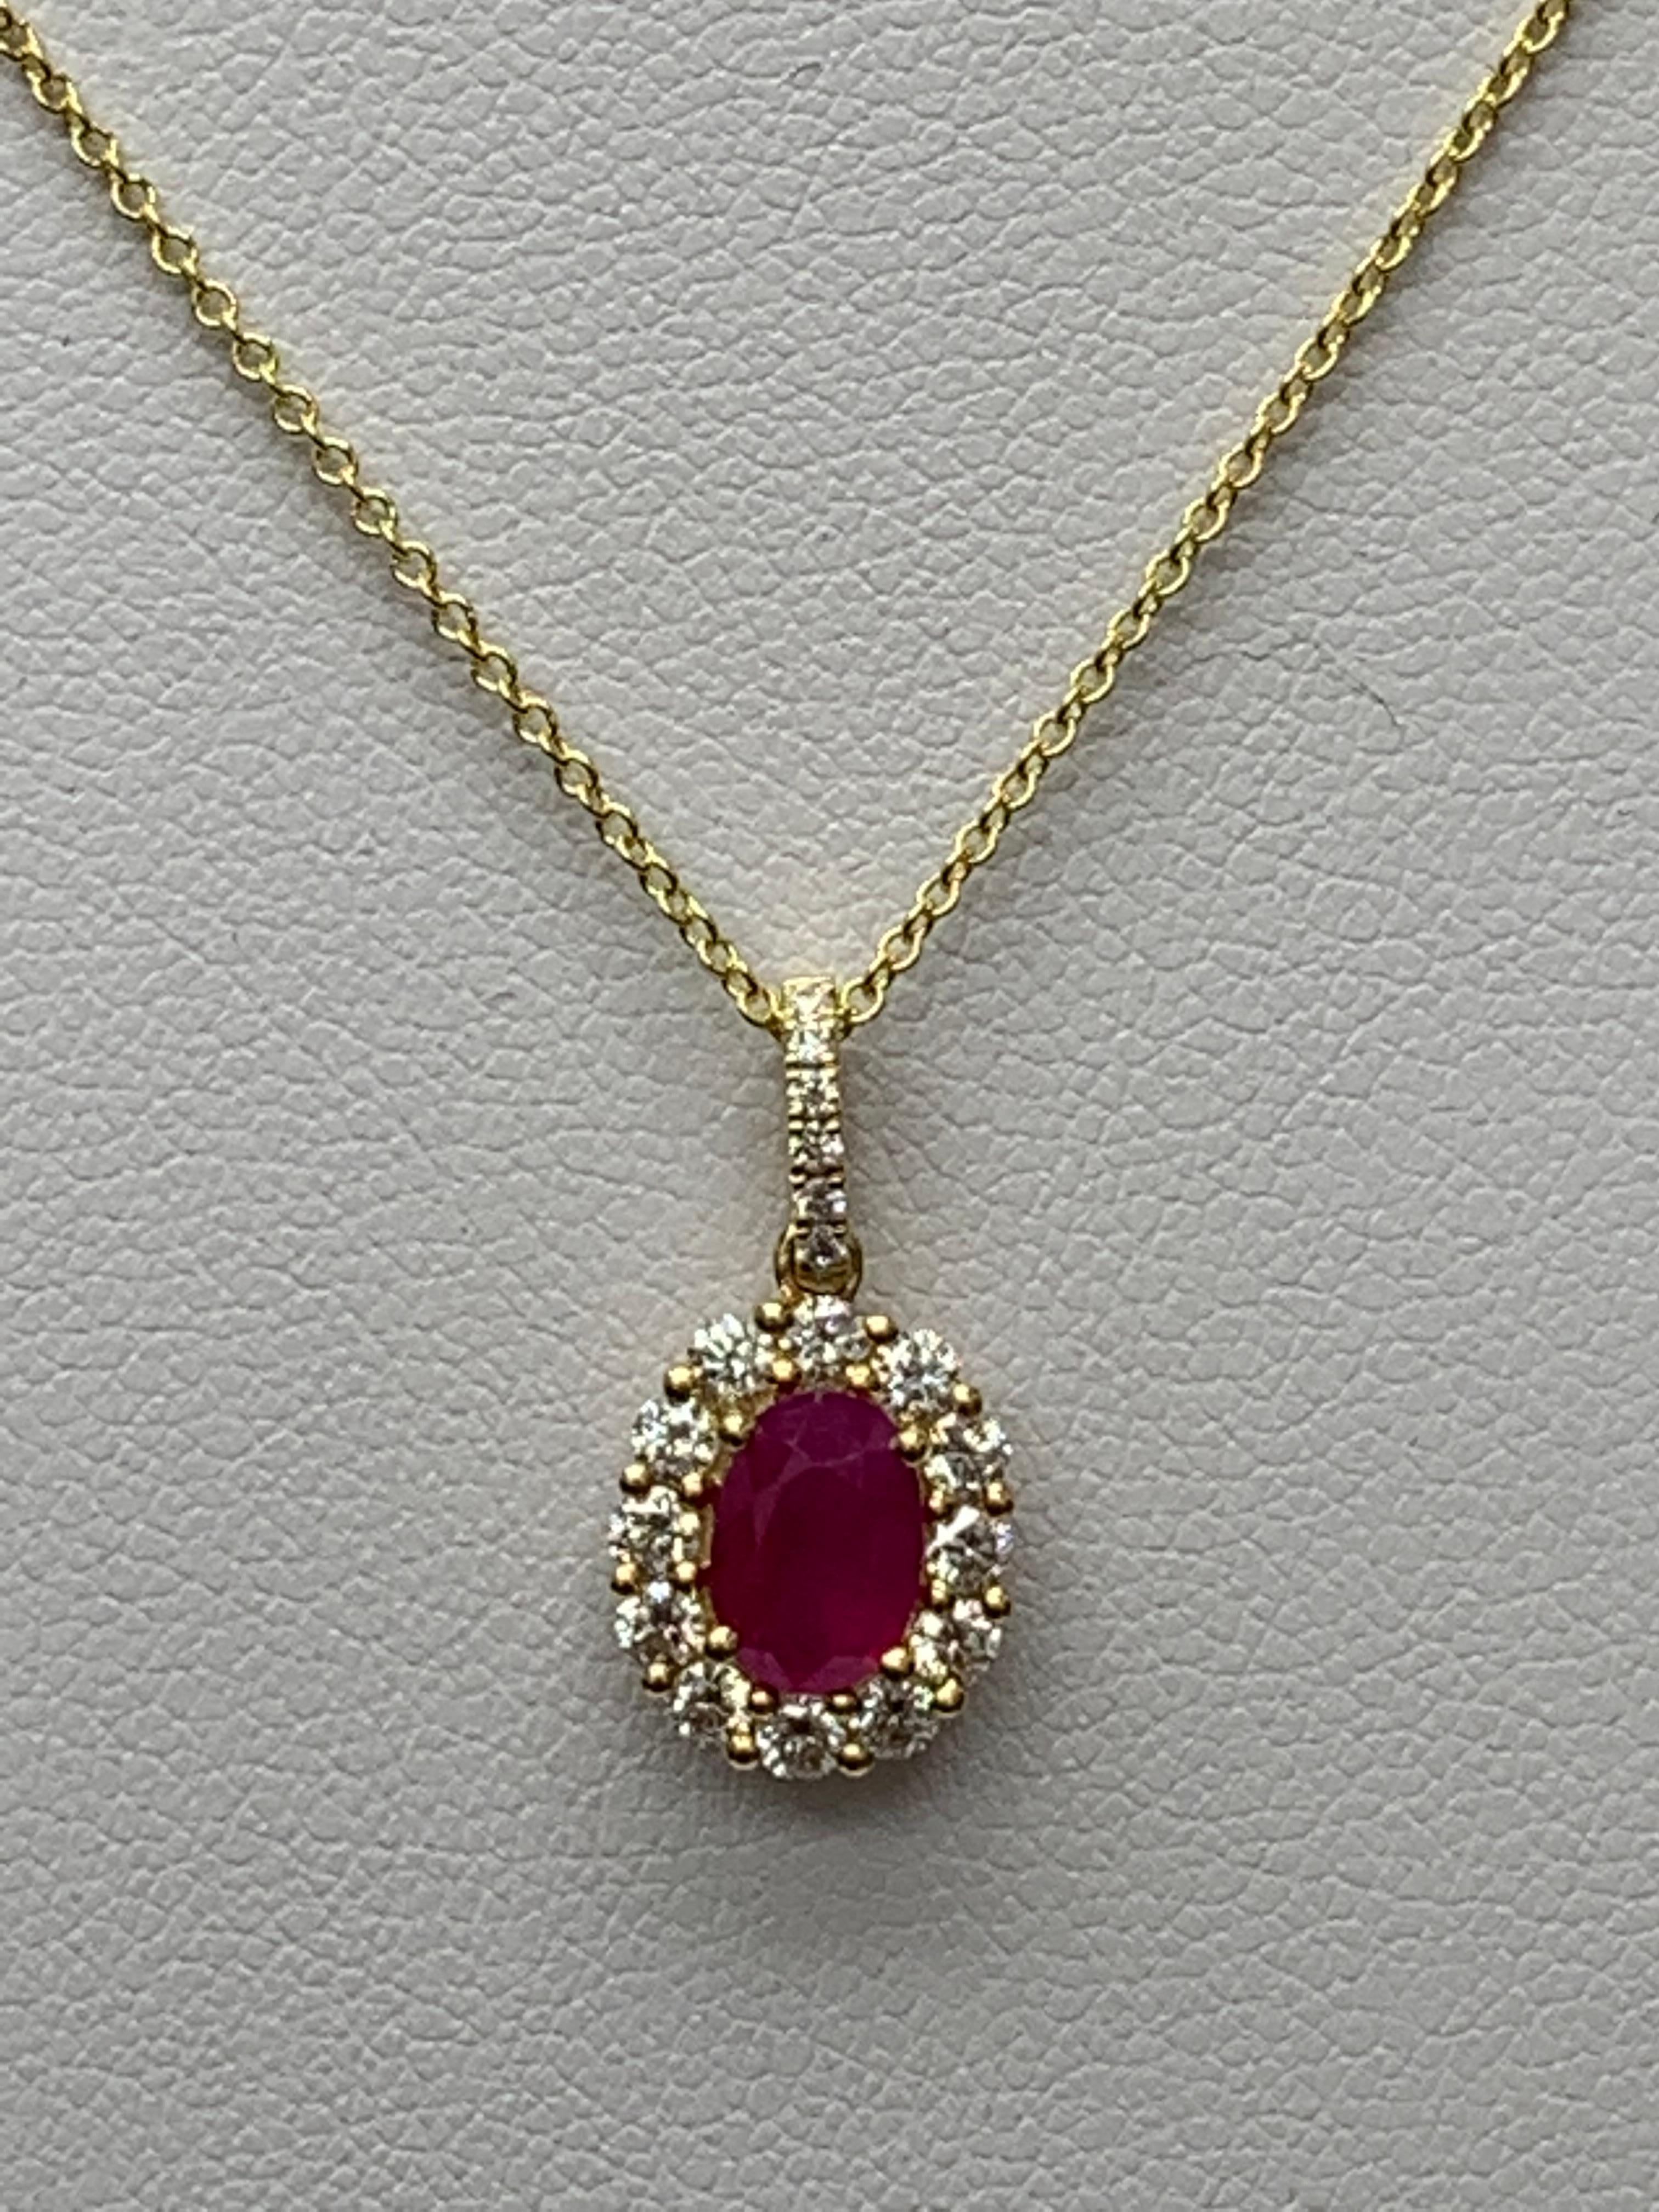 Modern 1.00 Carat Oval Cut Ruby and Diamond Halo Pendant Necklace in 18K Yellow Gold For Sale